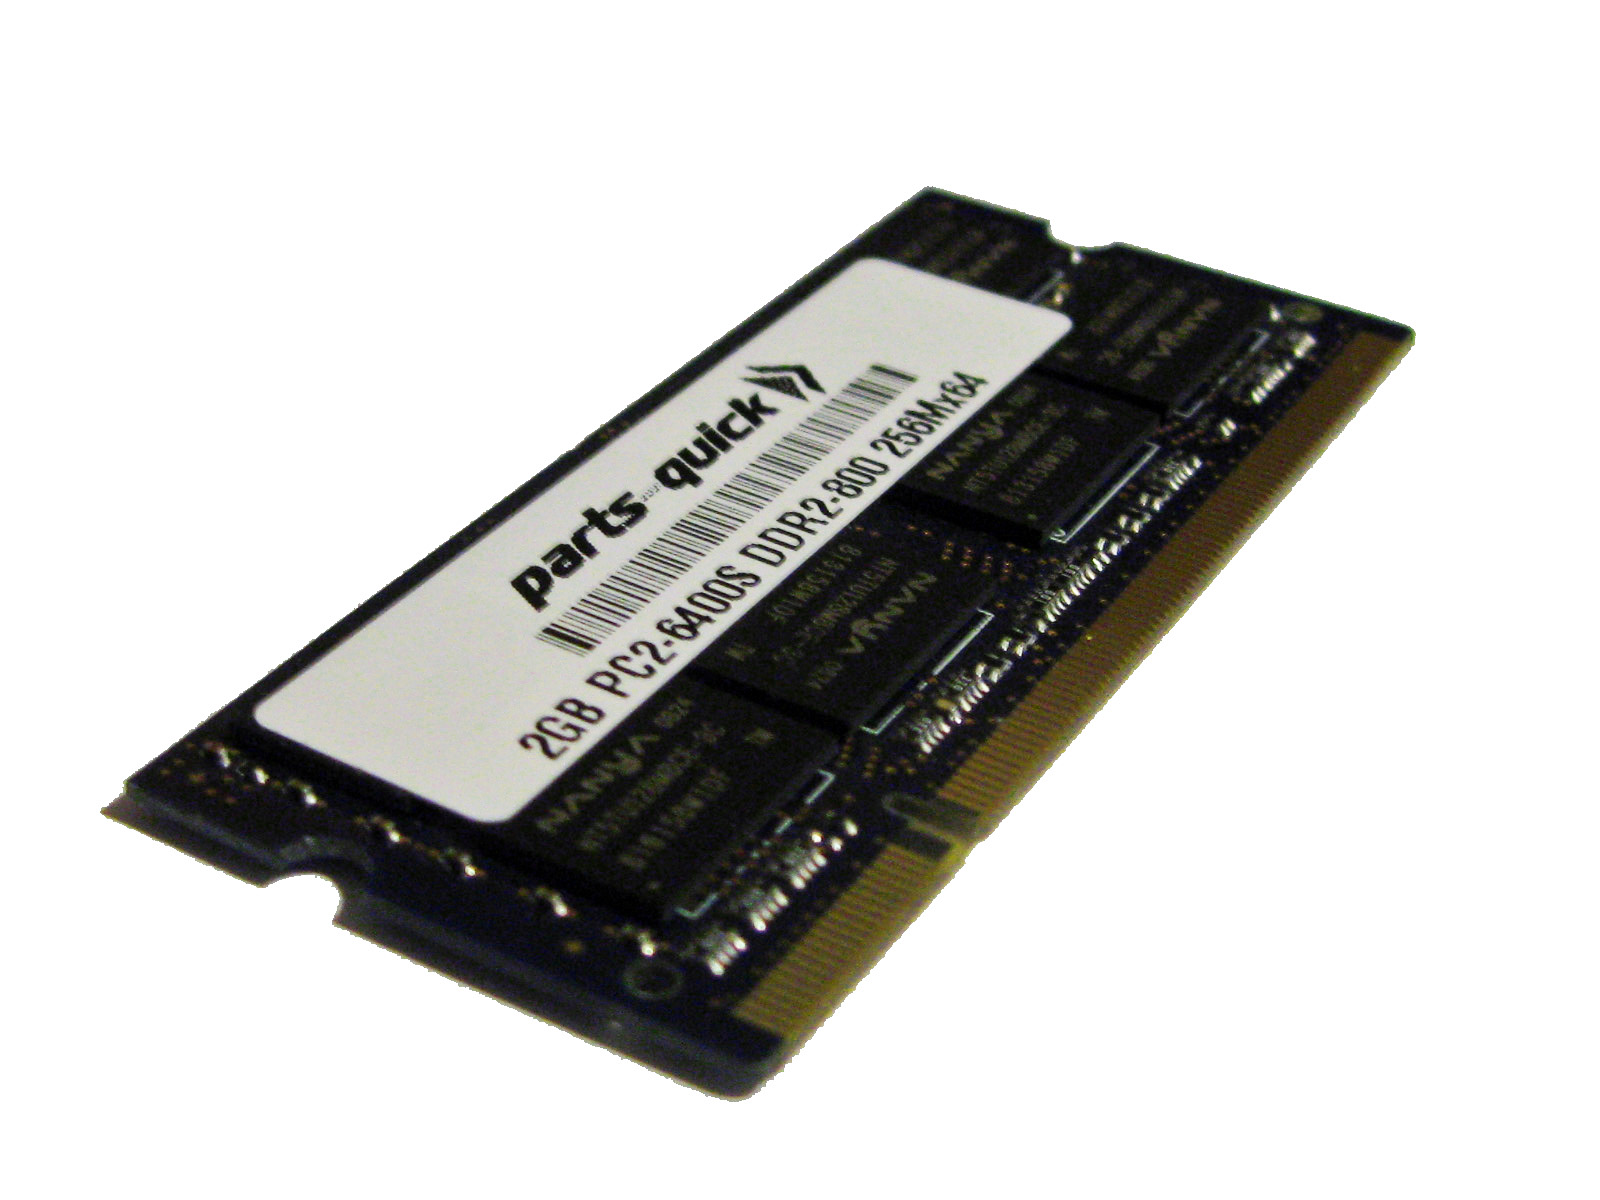 2GB DDR2 800MHz RAM Memory Upgrade for Panasonic Toughbook 74 CF-74 (PARTS-QUICK) - image 1 of 1